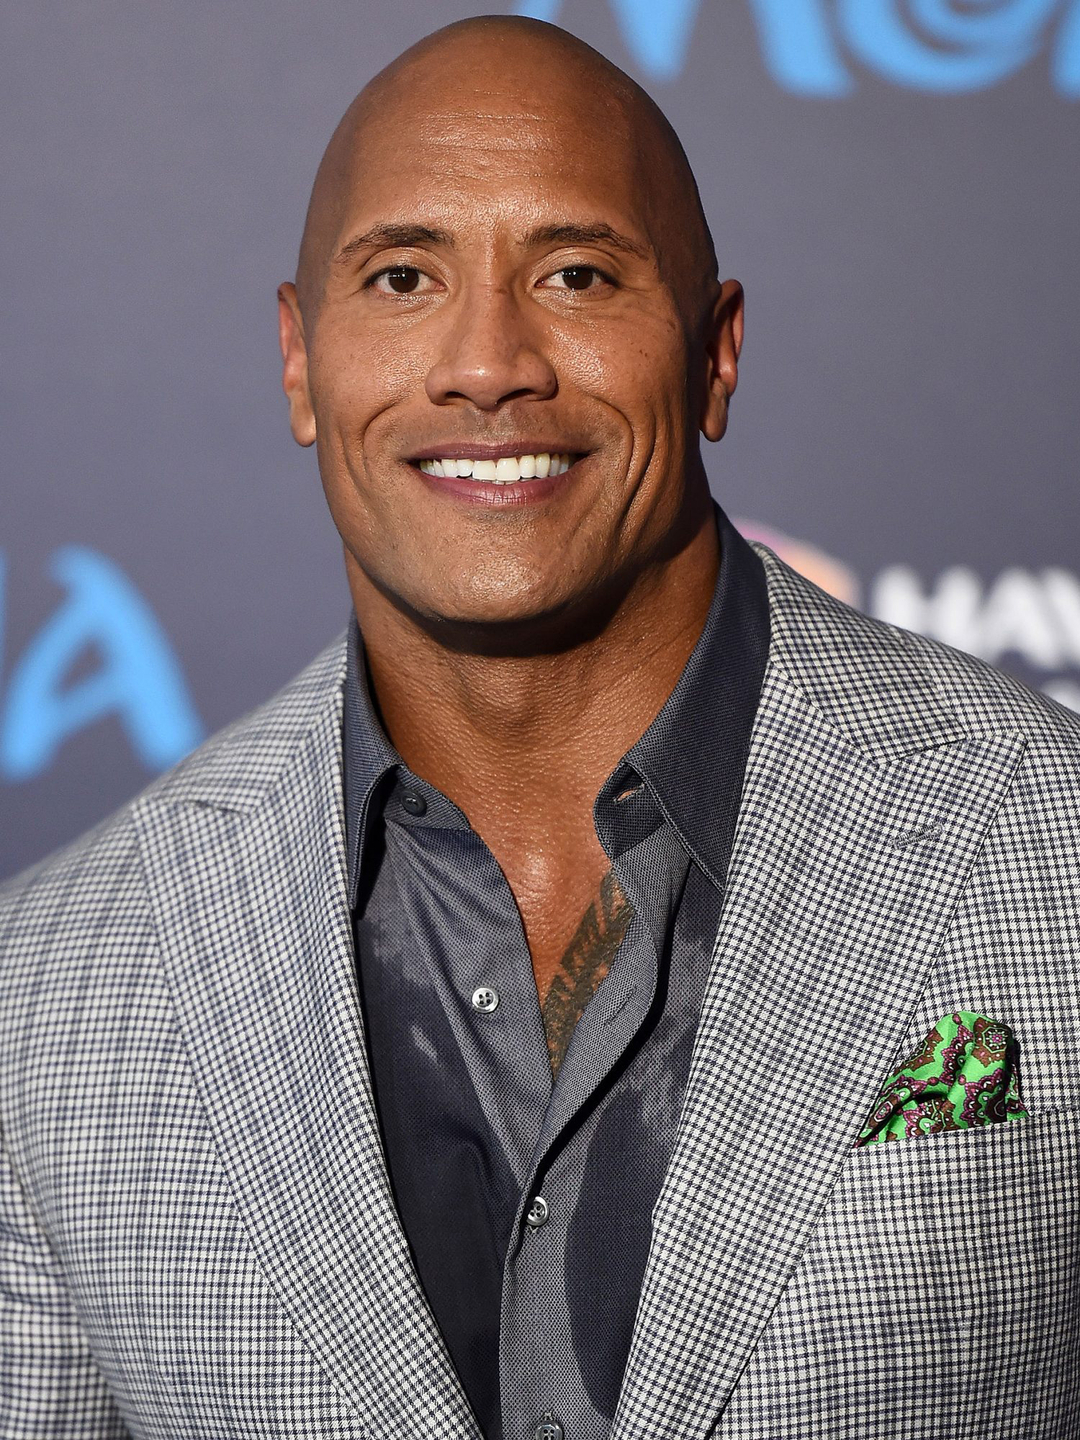 Dwayne Johnson who are his parents